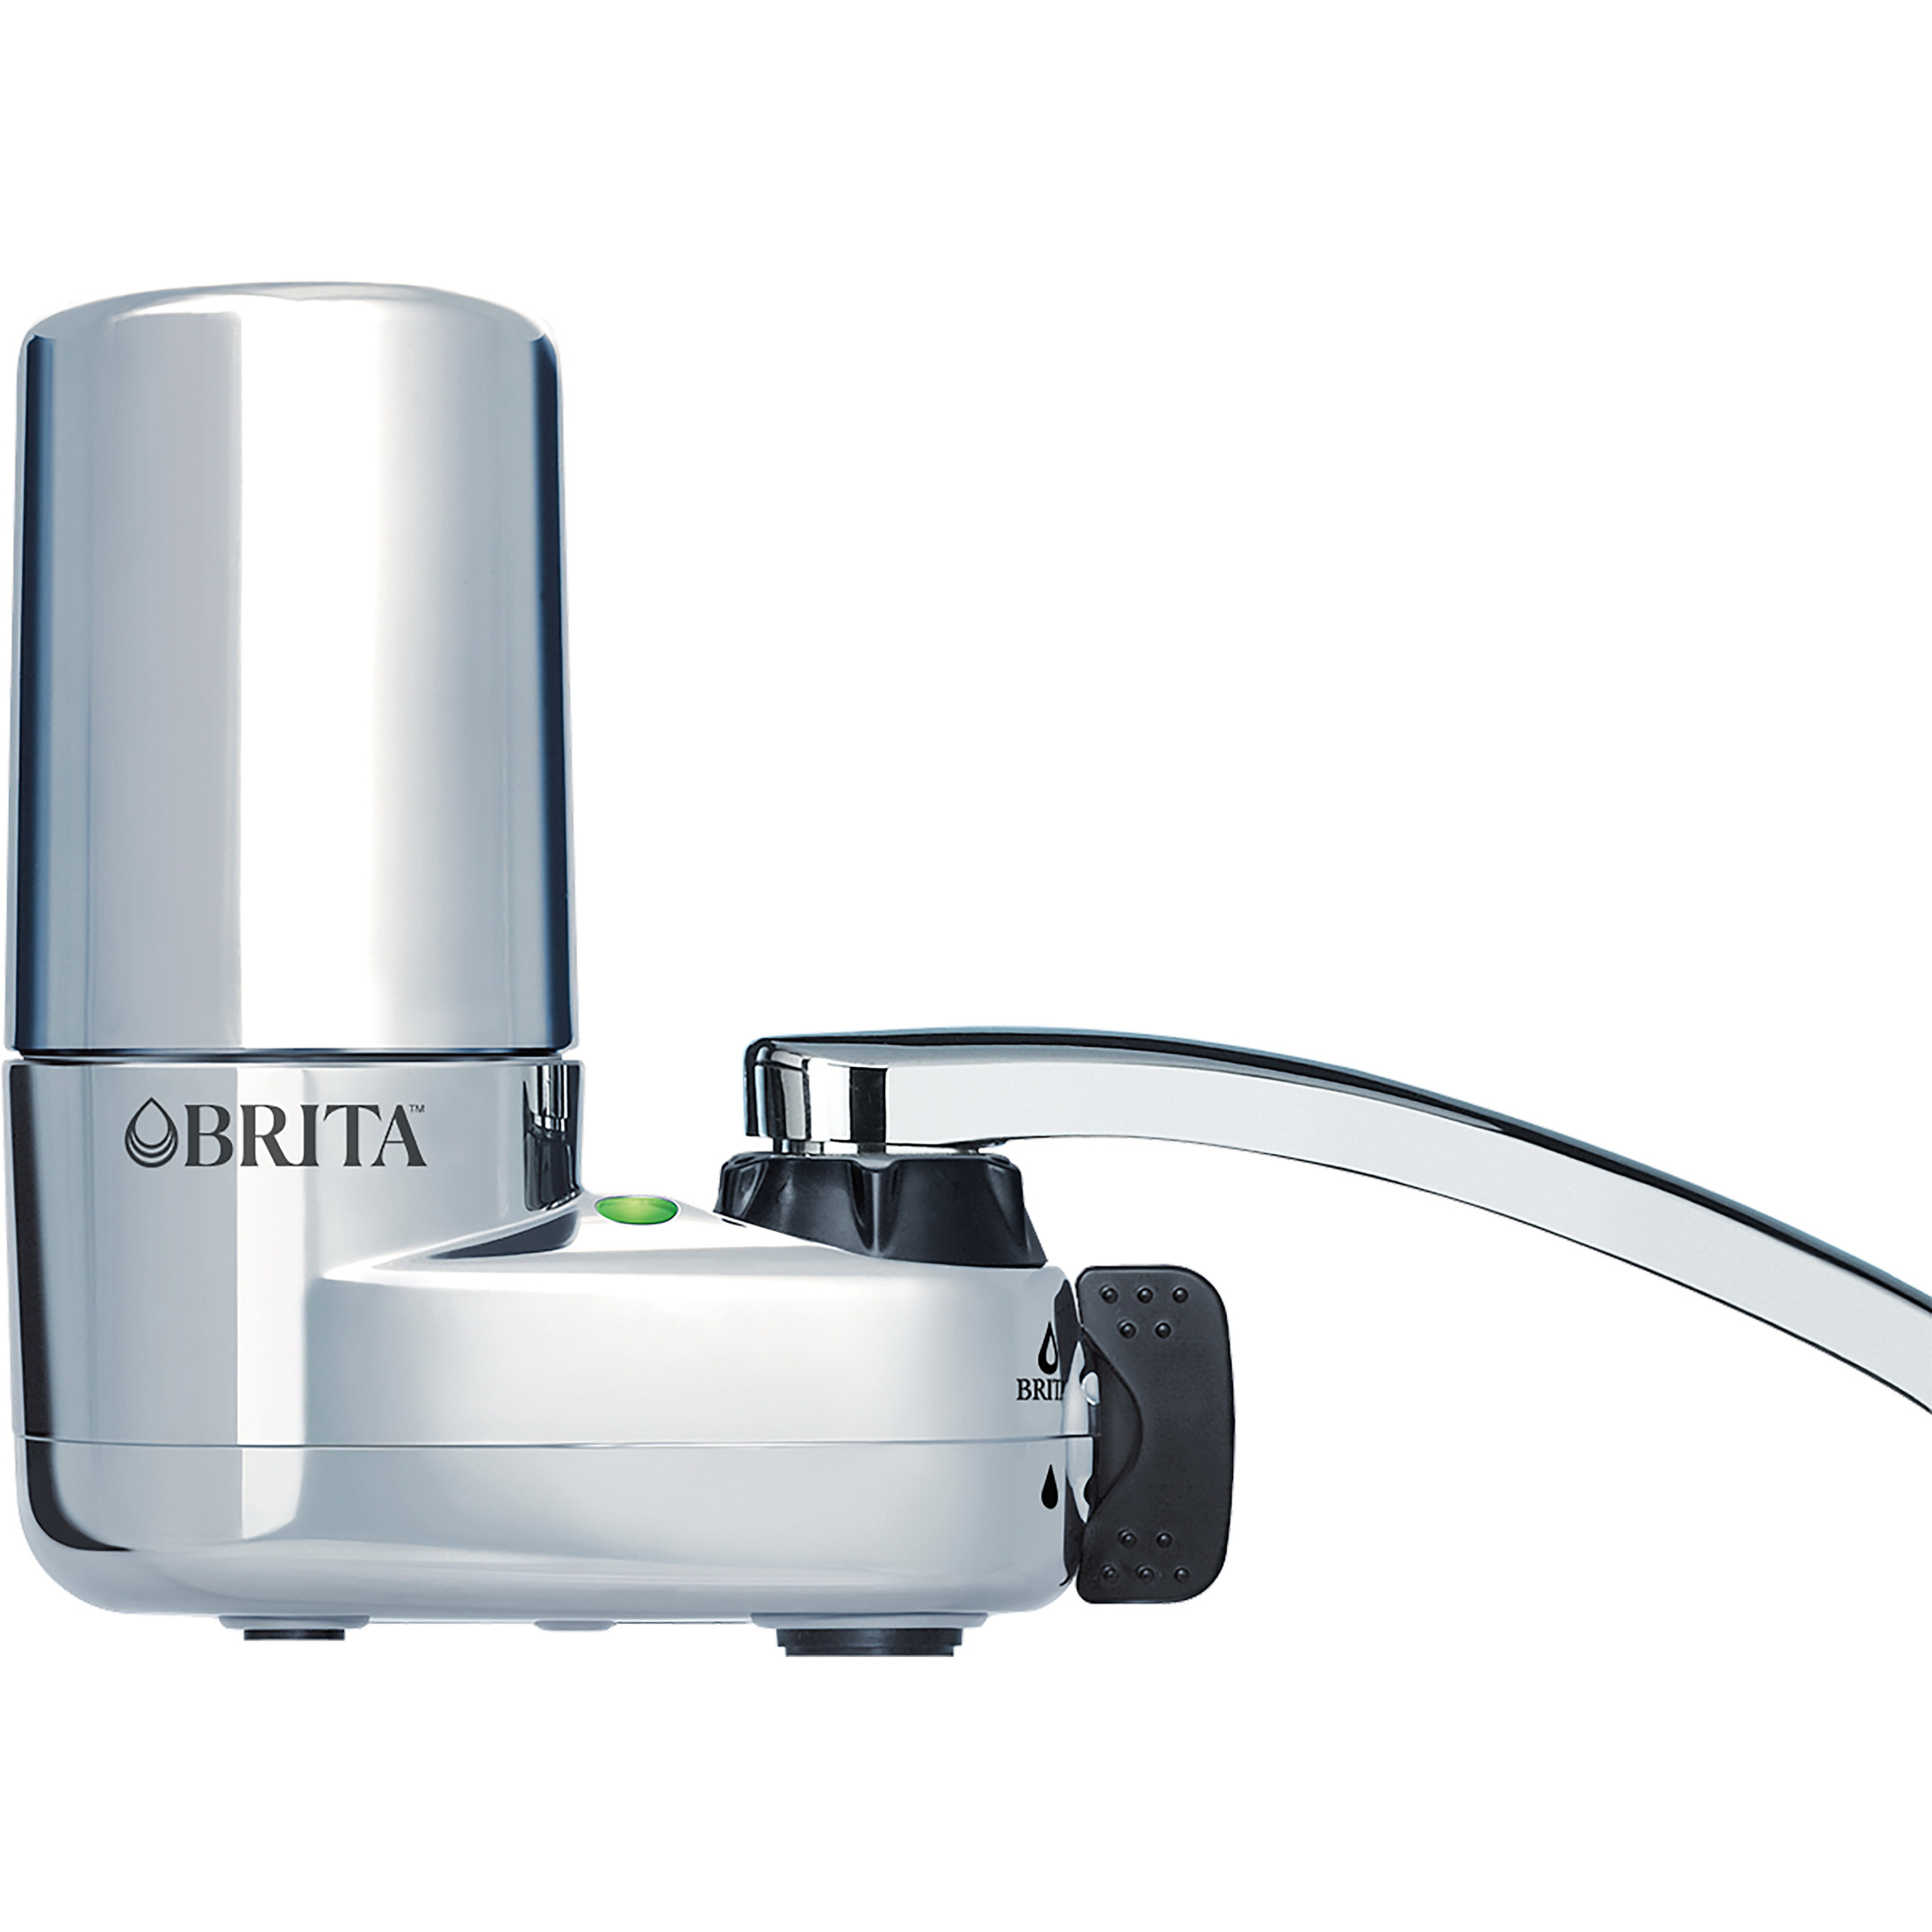 Brita Elite Water Faucet Filtration Mount System, Fits Standard Faucets, Chrome, Includes 1 Filter - image 1 of 9